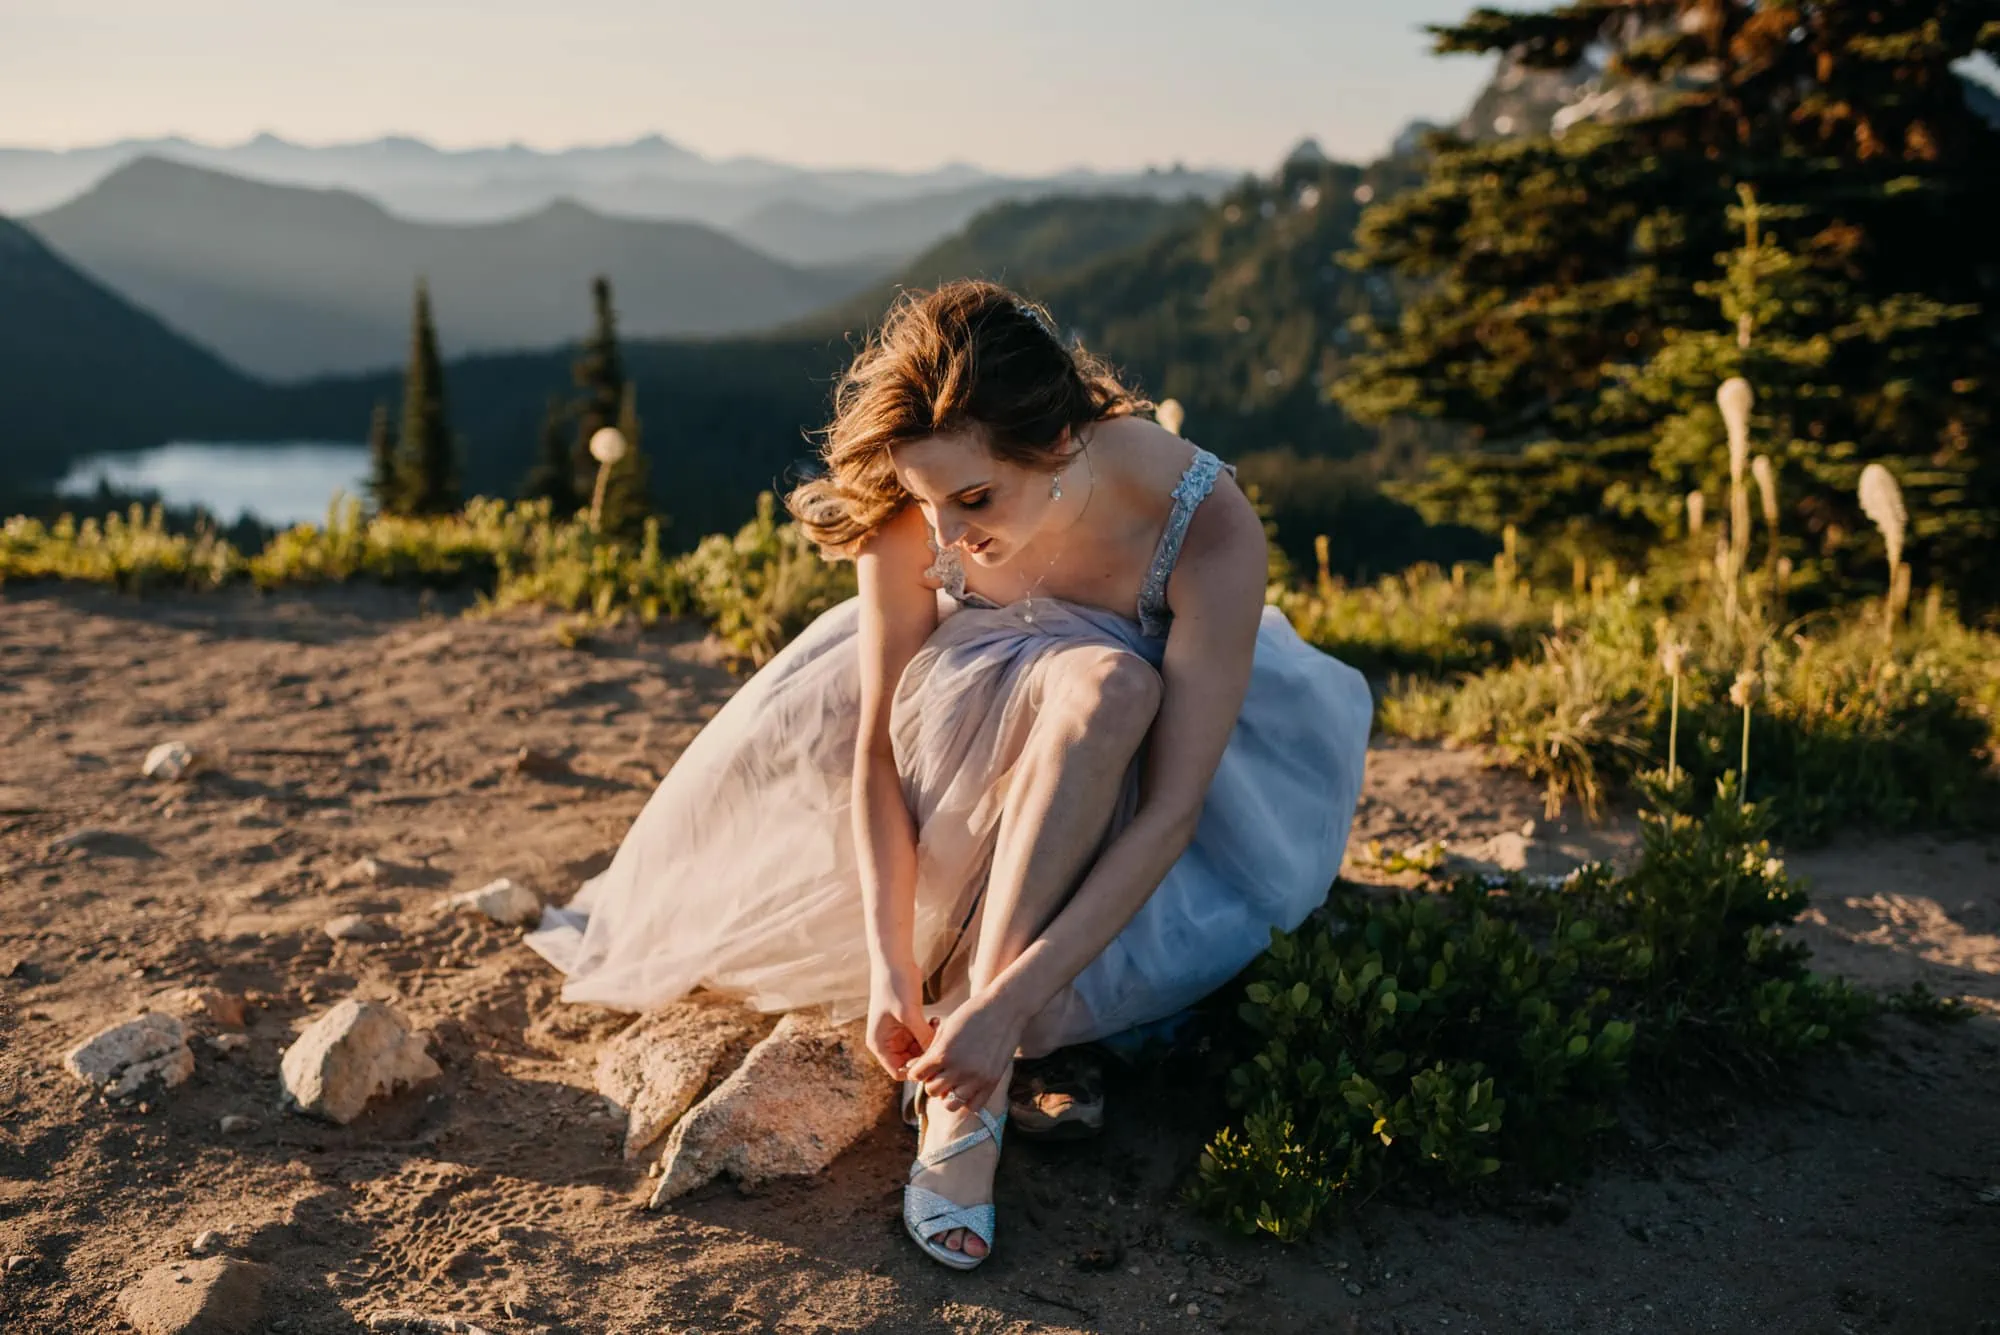 The bride ties her shoe while sitting on the trail.